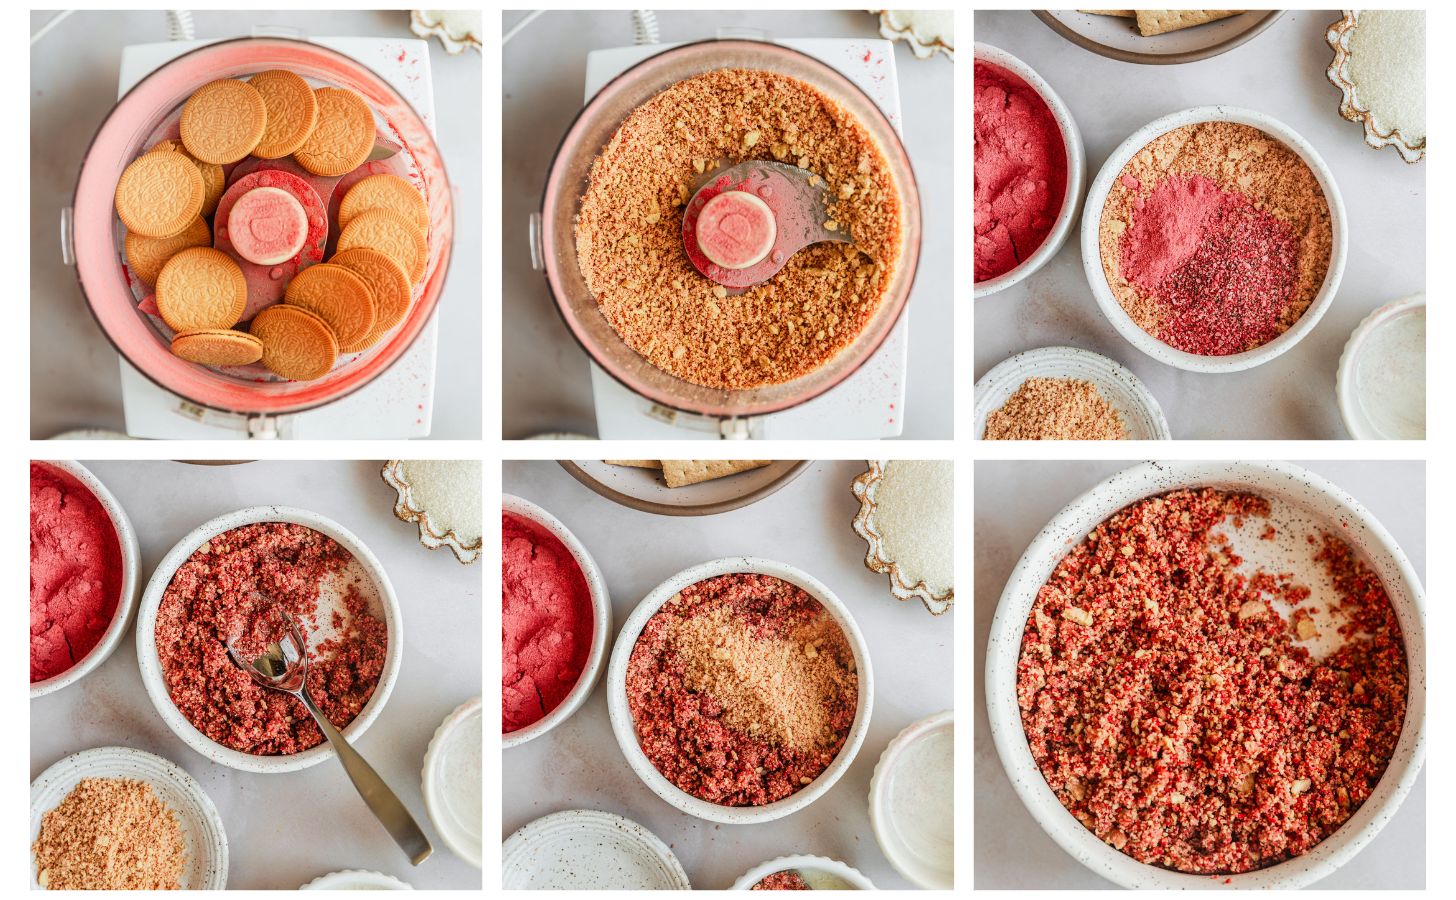 Six steps to making strawberry crunch topping. In photo 1, a food processor with golden Oreos is on a pink counter. In photo 2, the Oreos are crushed. In photo 3, a white bowl of Golden Oreo crumbs and strawberry powder is on a pink counter next to white bowls of sugar, strawberry powder, graham crackers, and butter. In photo 4, the crumbs are mixed together. In photo 5, the crumbs are topped with plain golden Oreo crumbs. In photo 6, the topping is mixed together.